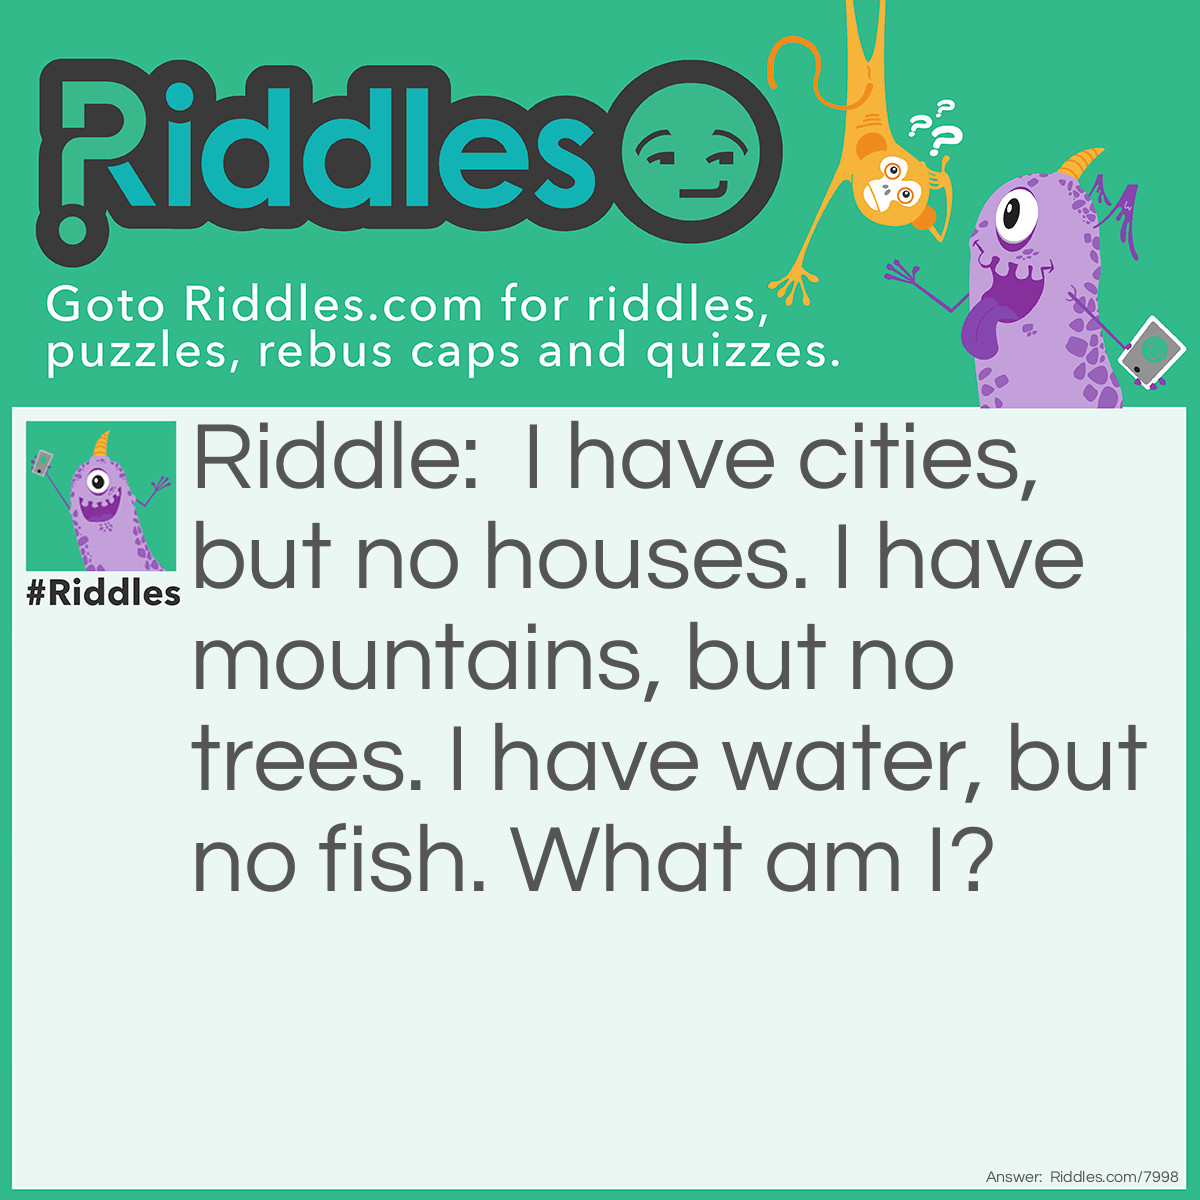 Riddle: I have cities, but no houses. I have mountains, but no trees. I have water, but no fish. What am I? Answer: A map.